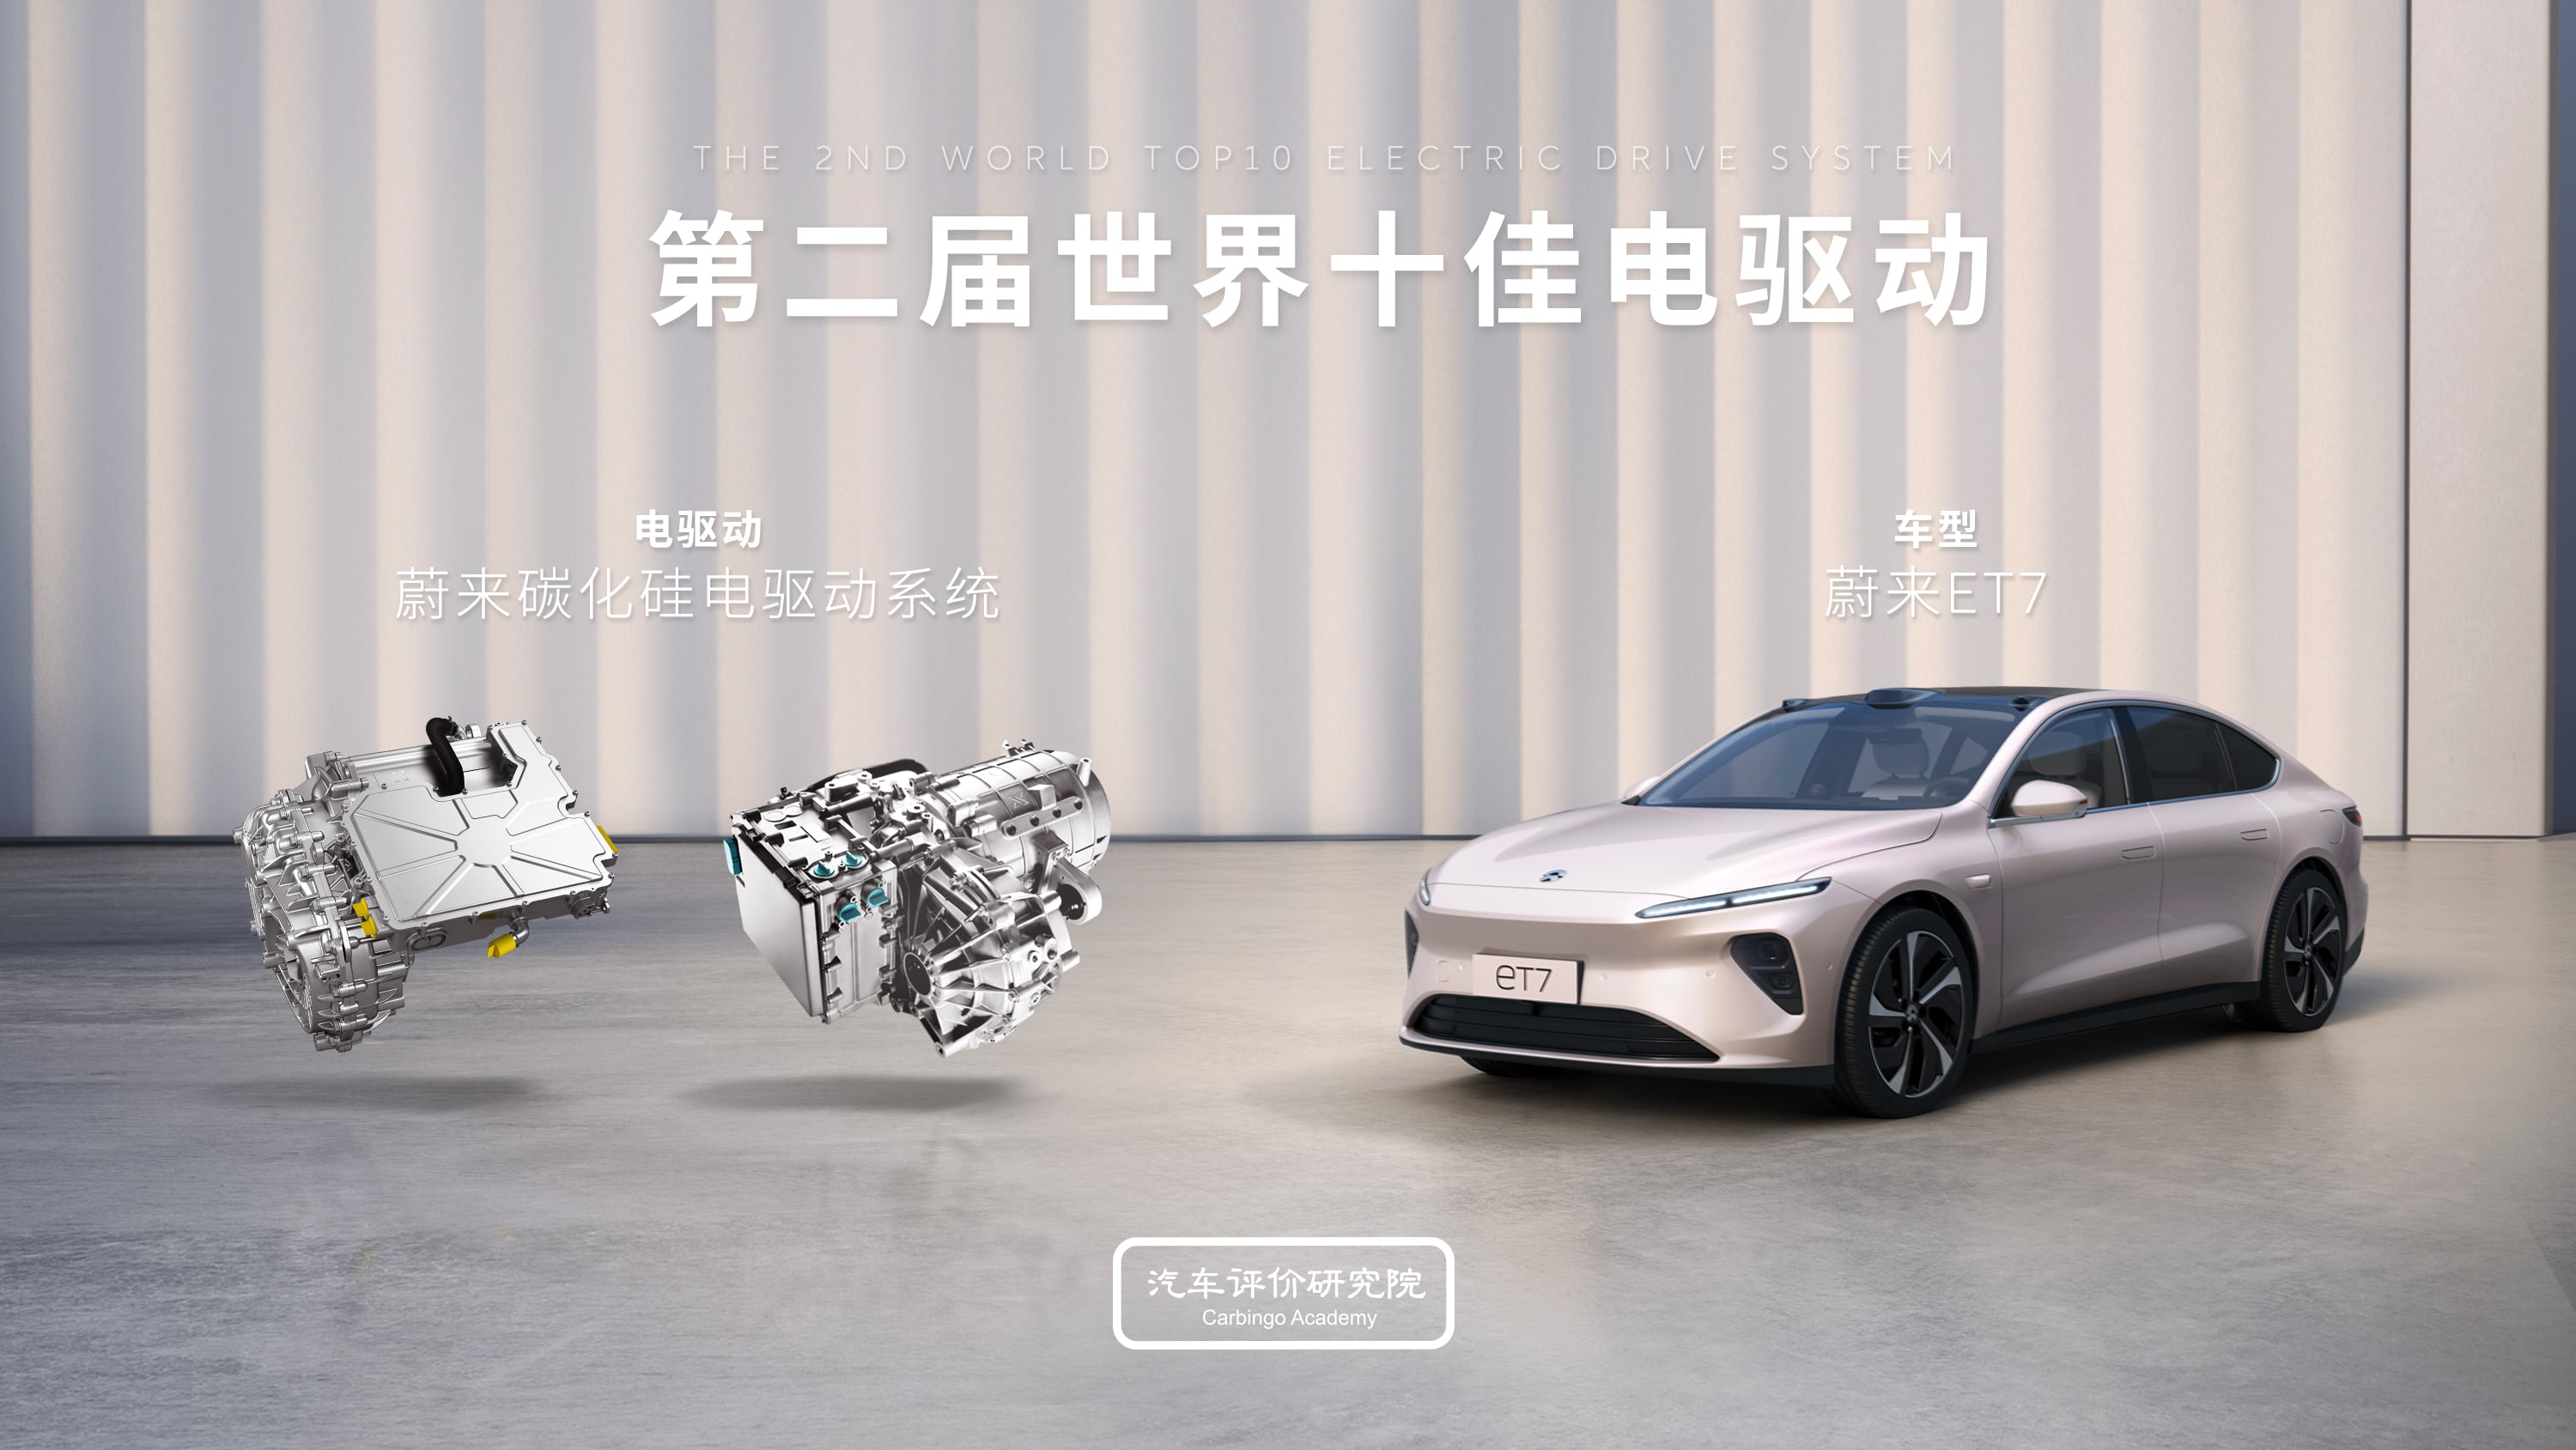 NIO ET7 Electric Drive System Wins the Award of World Top 10 EDS